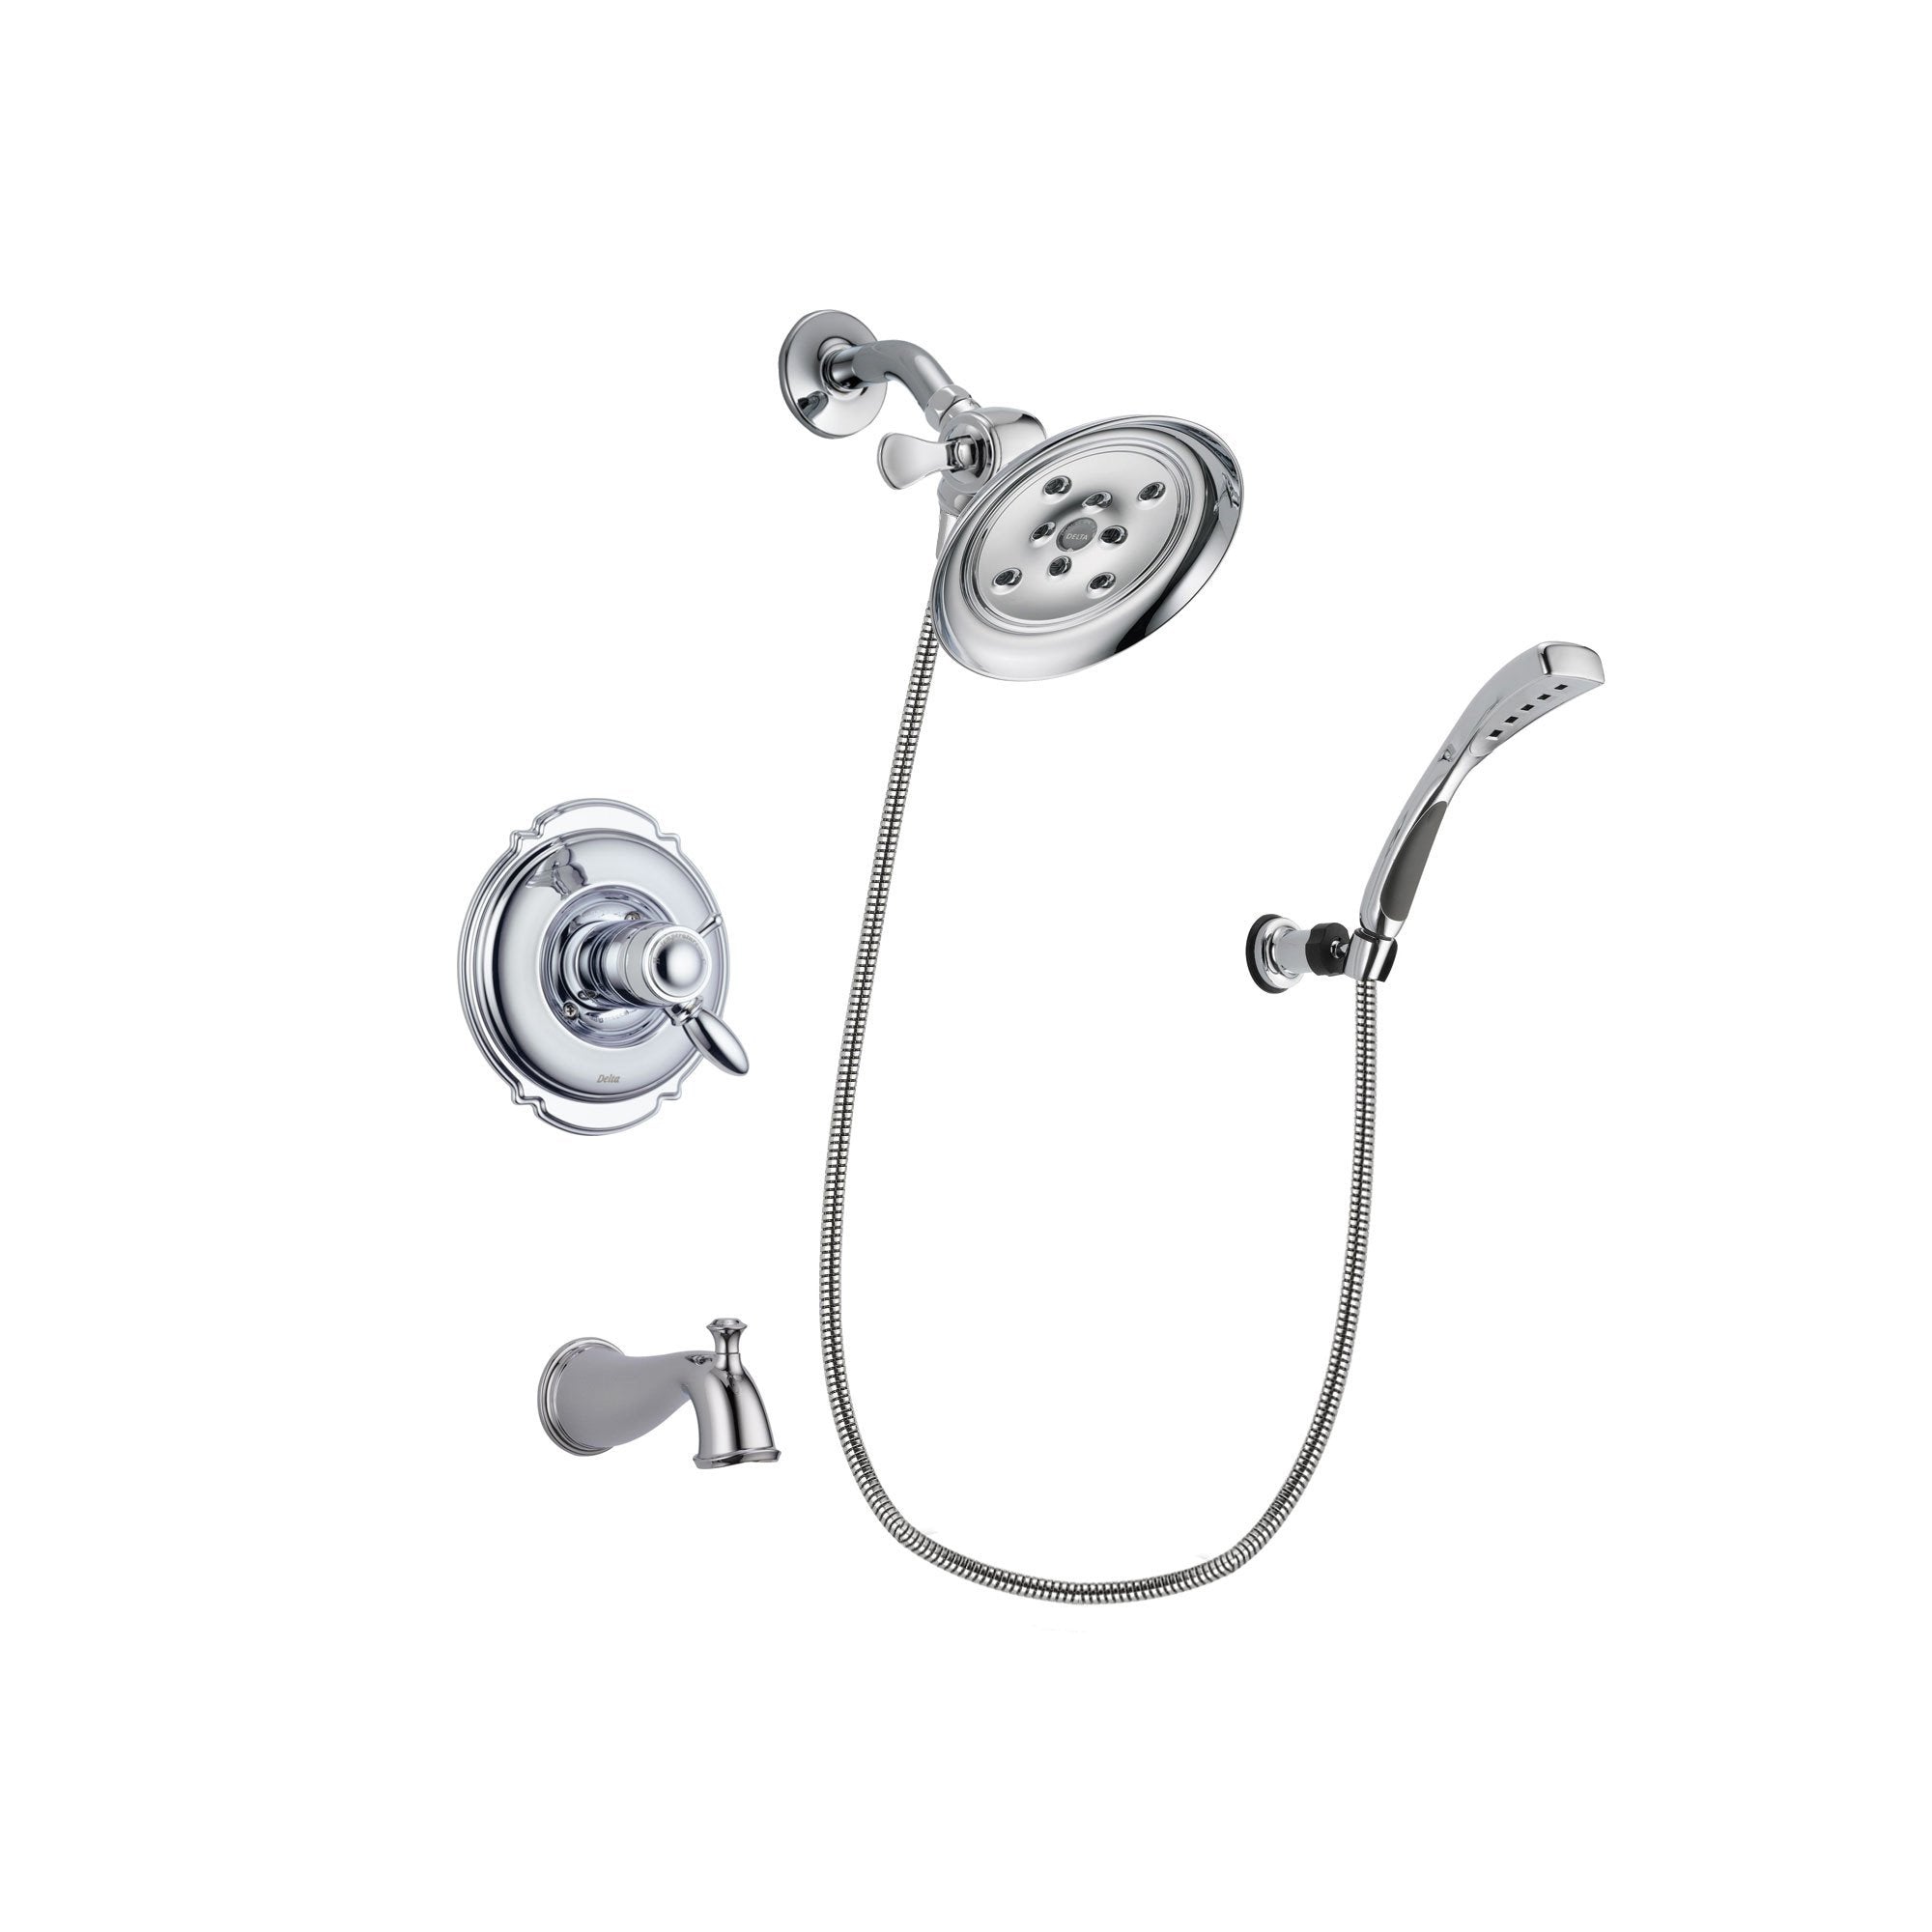 Delta Victorian Chrome Finish Thermostatic Tub and Shower Faucet System Package with Large Rain Showerhead and Wall-Mount Bracket with Handheld Shower Spray Includes Rough-in Valve and Tub Spout DSP1039V